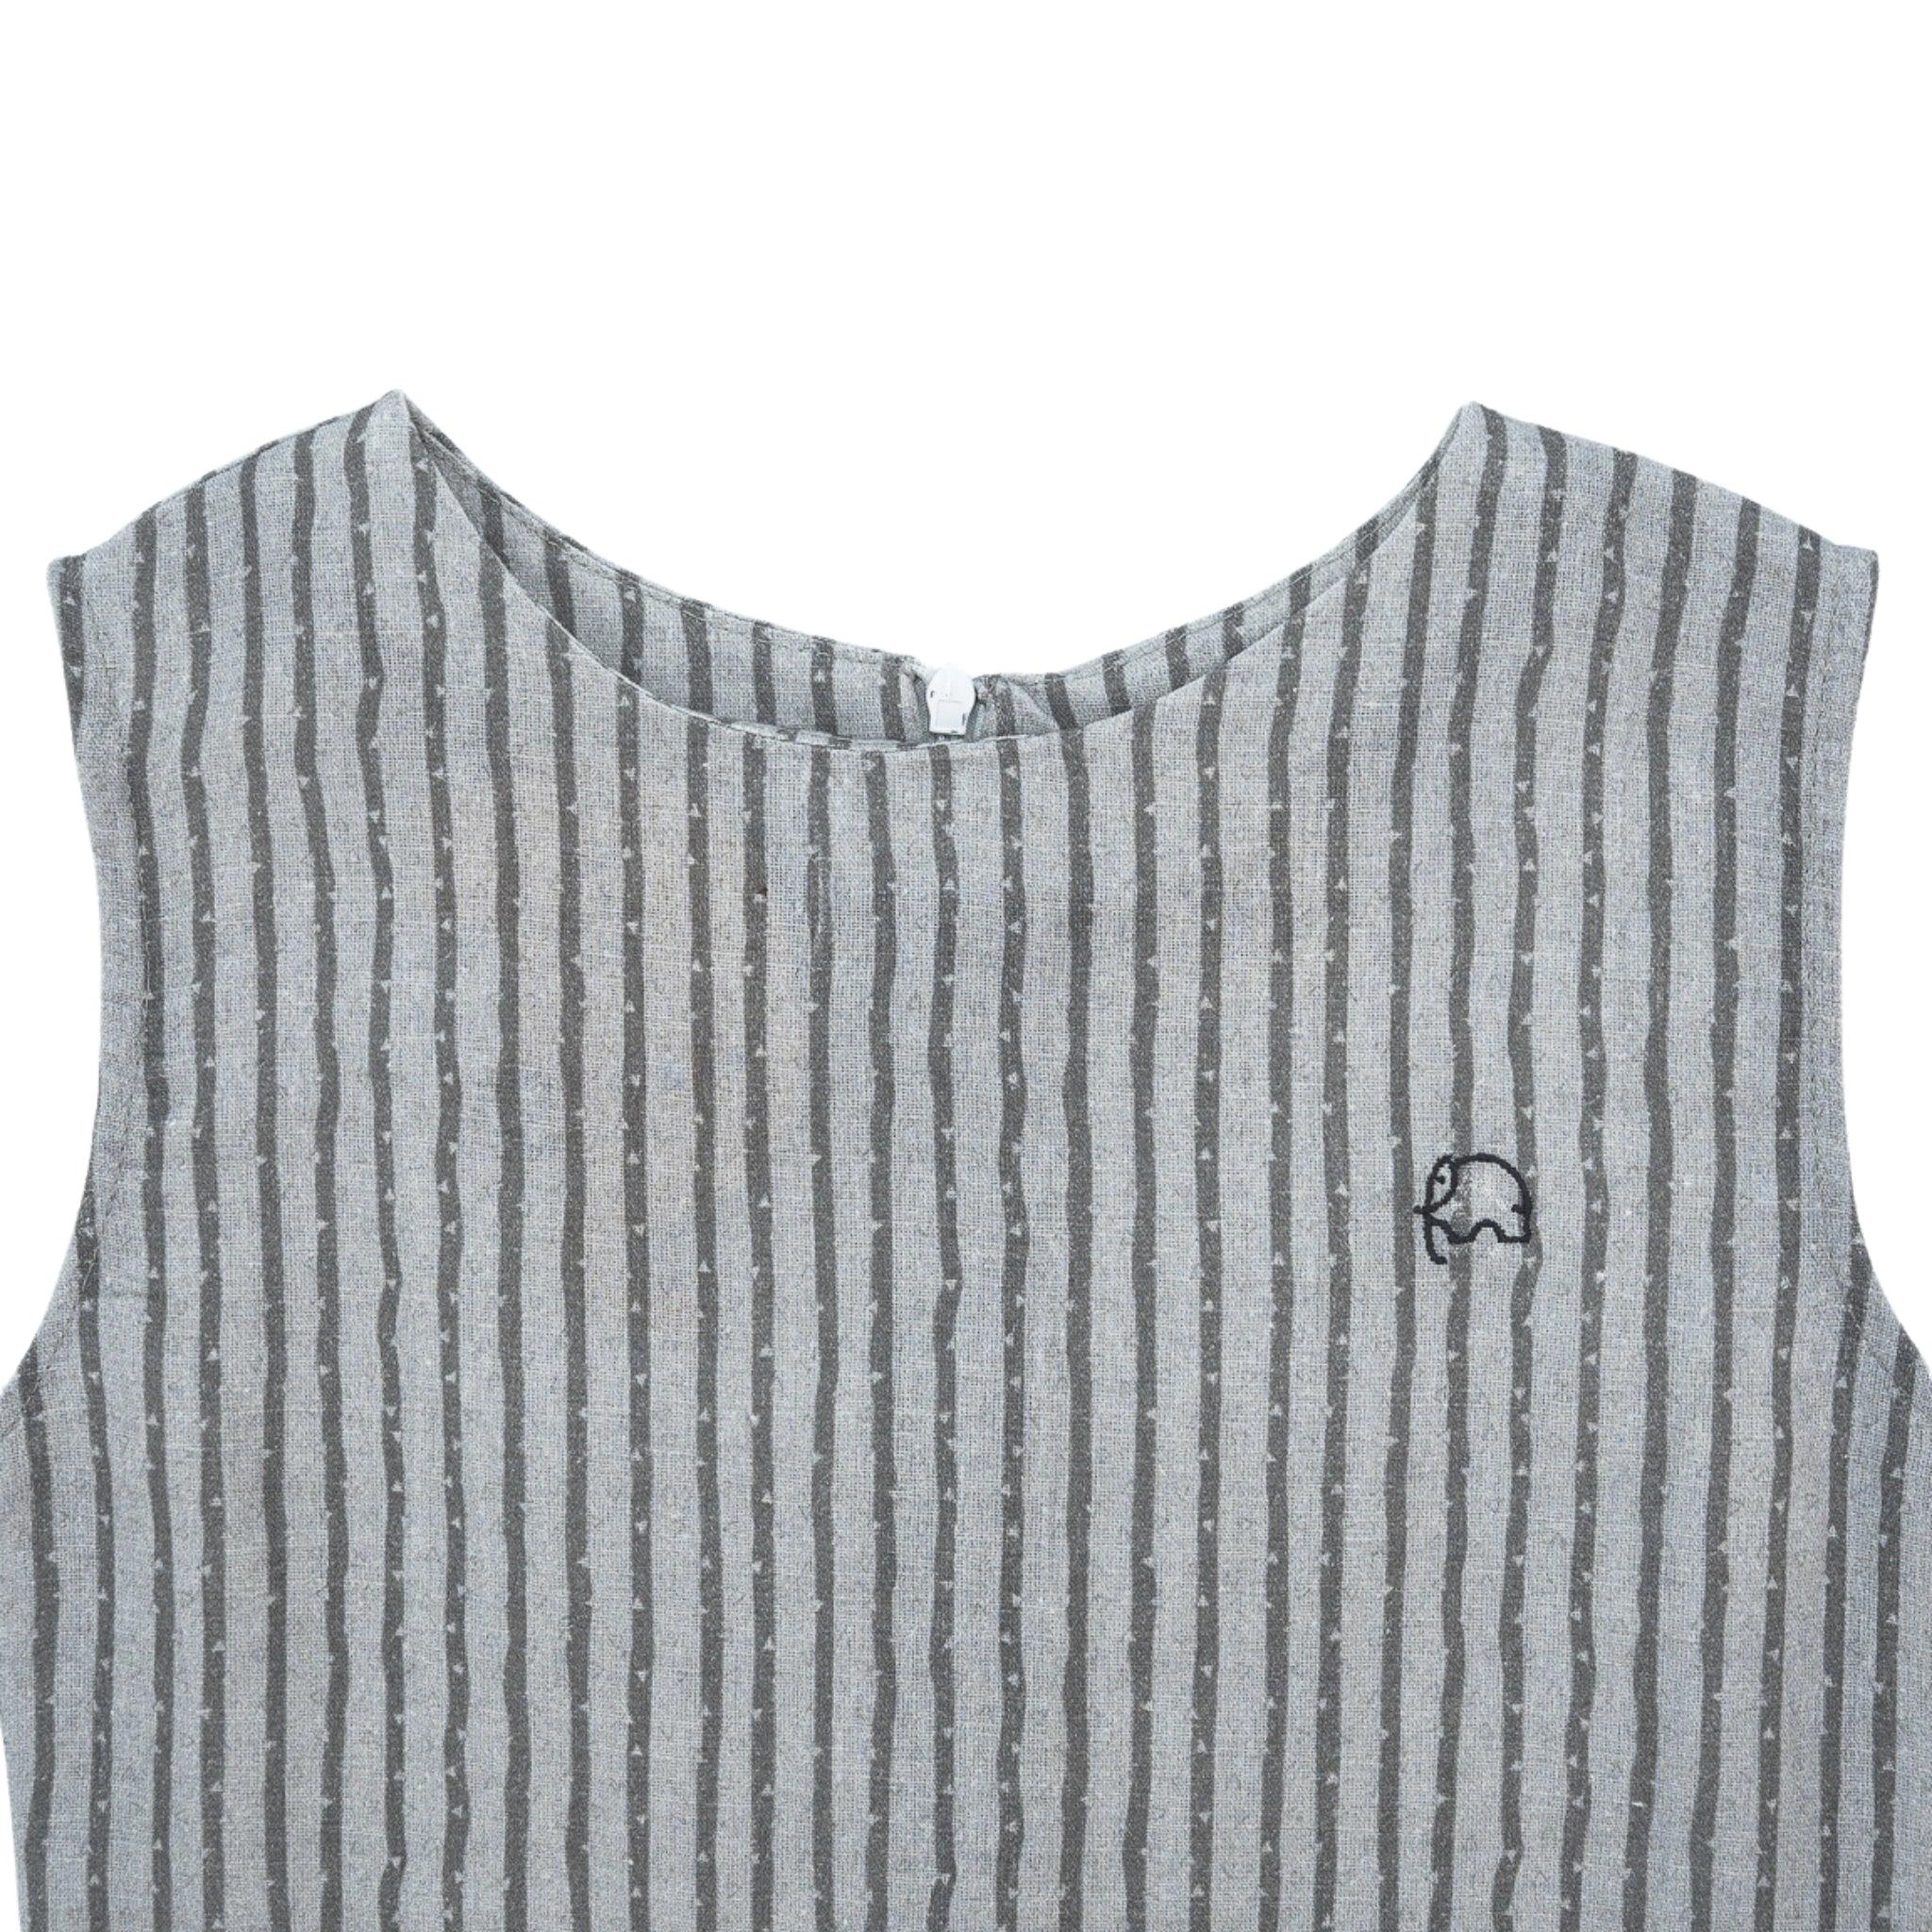 Karee Steel grey sleeveless top with white vertical stripes and a small embroidered elephant on the left side, against a plain background.